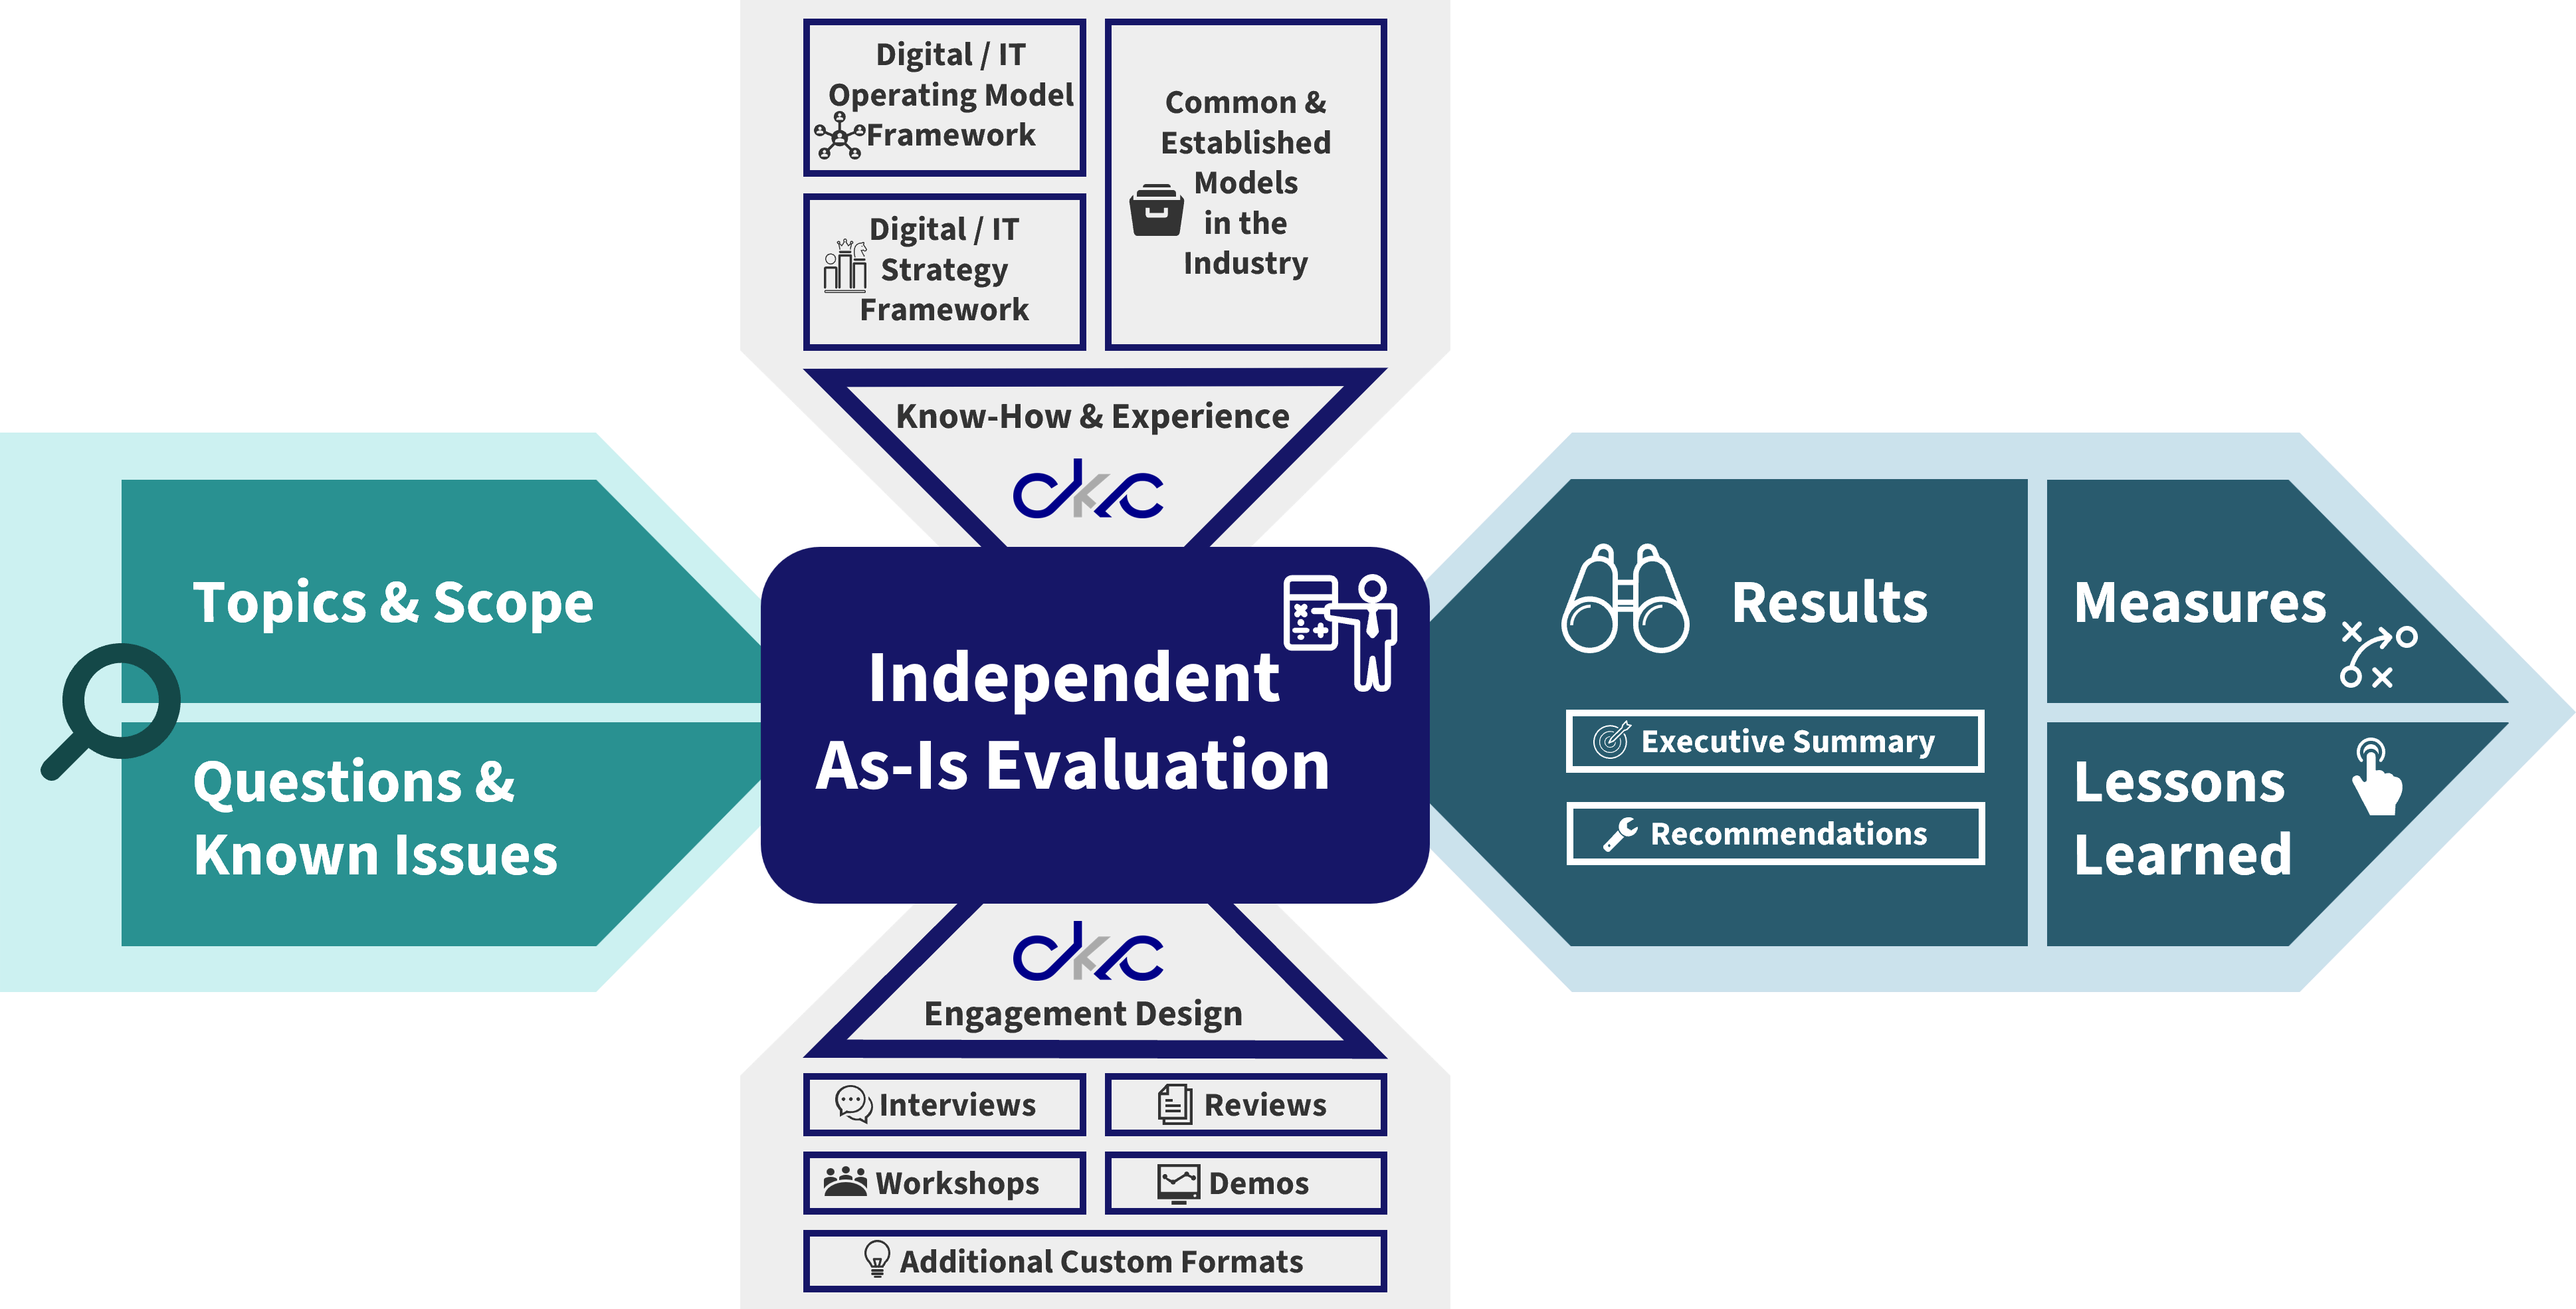 CKC Independent As-Is Evaluation Model